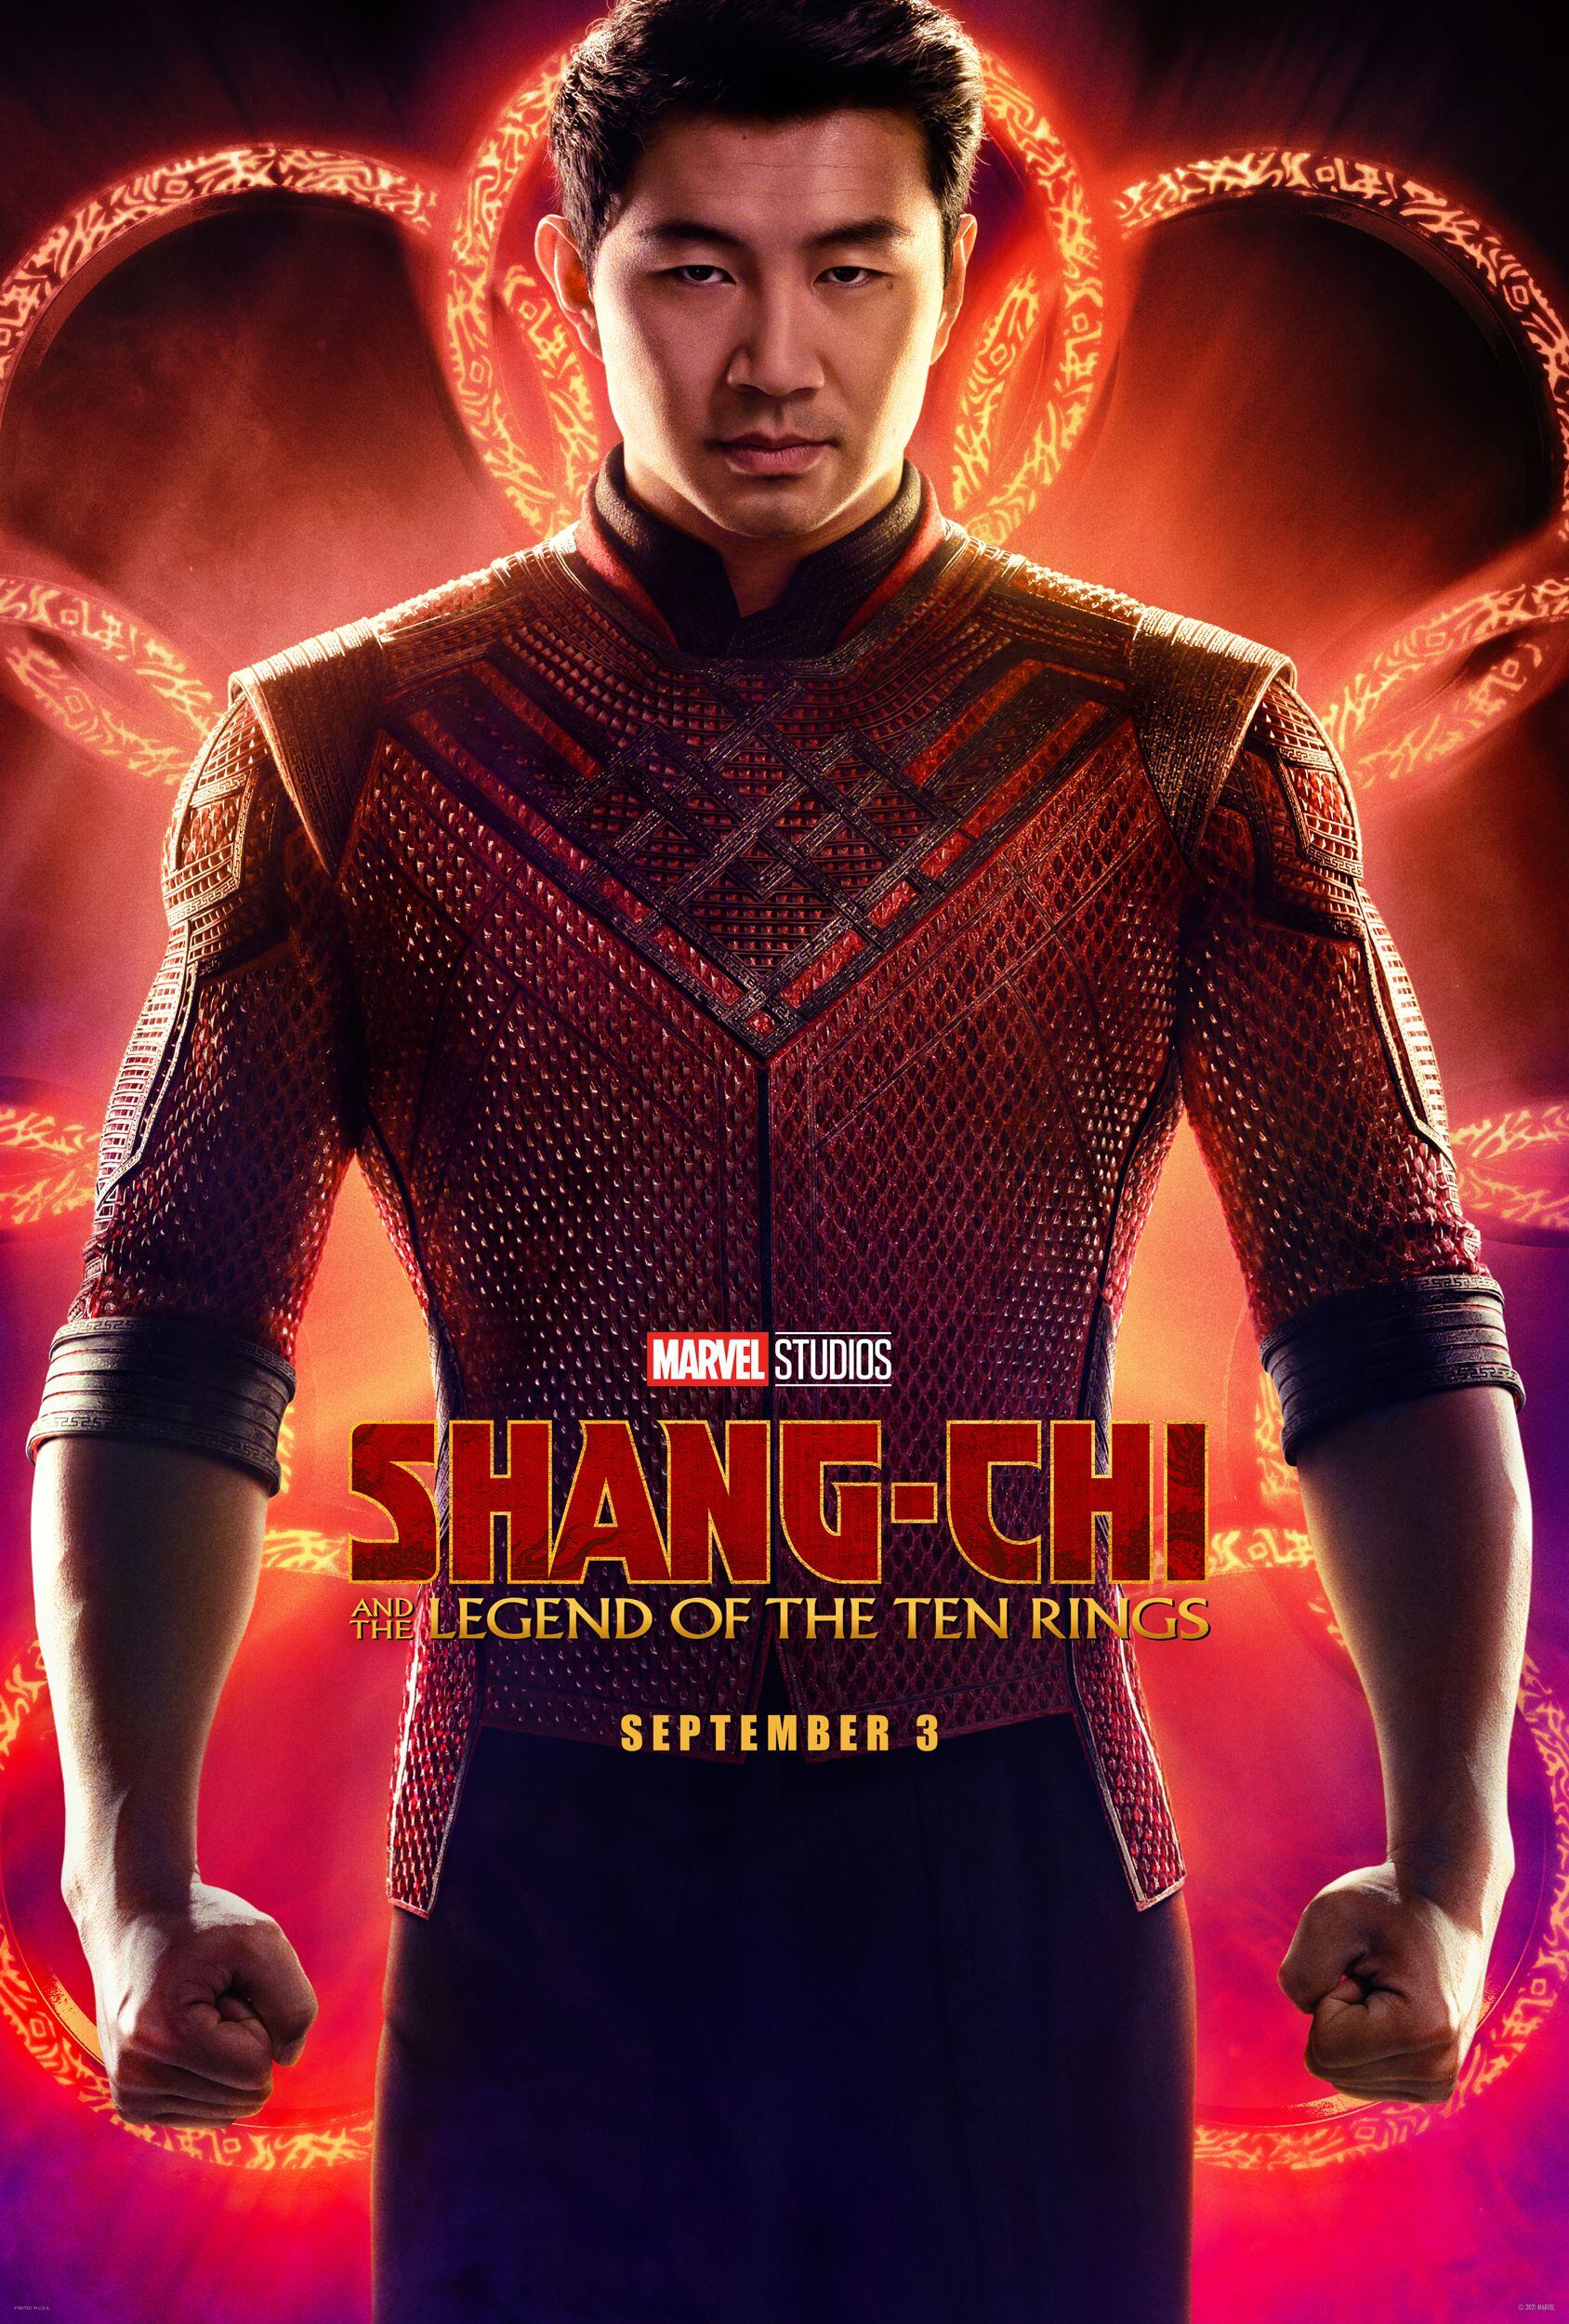 'Shang-Chi and the Legend of the Ten Rings'